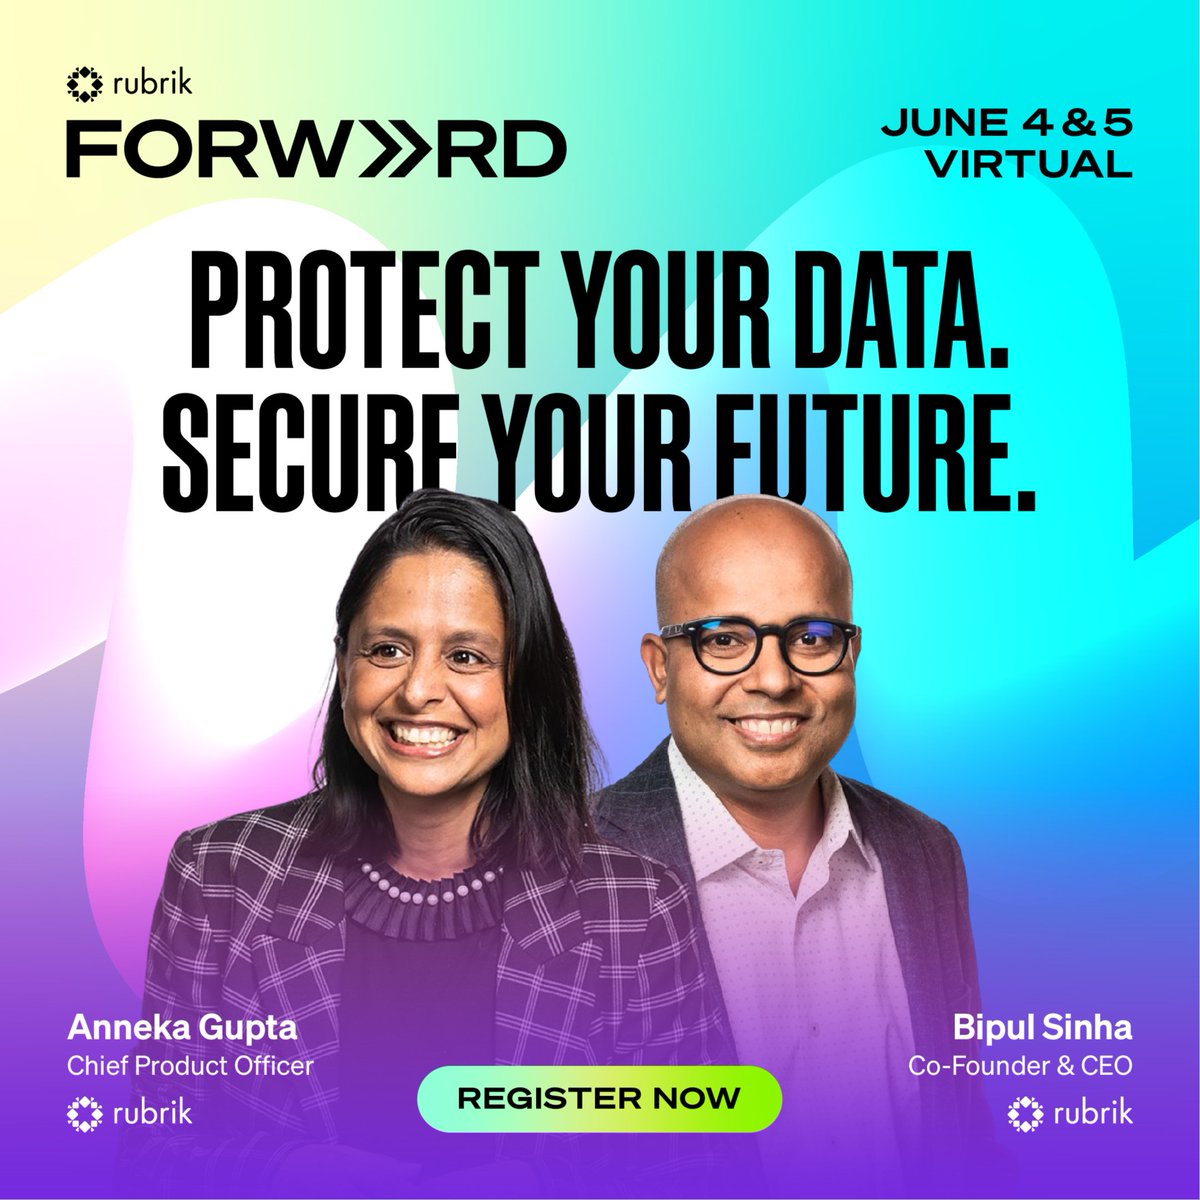 Plenty of sessions to look ‘forward’ to at this year’s event…but the one that stands out is our keynote, featuring Bipul Sinha and Anneka Gupta! Check out the full agenda for #RubrikFORWARD here: rbrk.co/4azHnup @RubrikInc